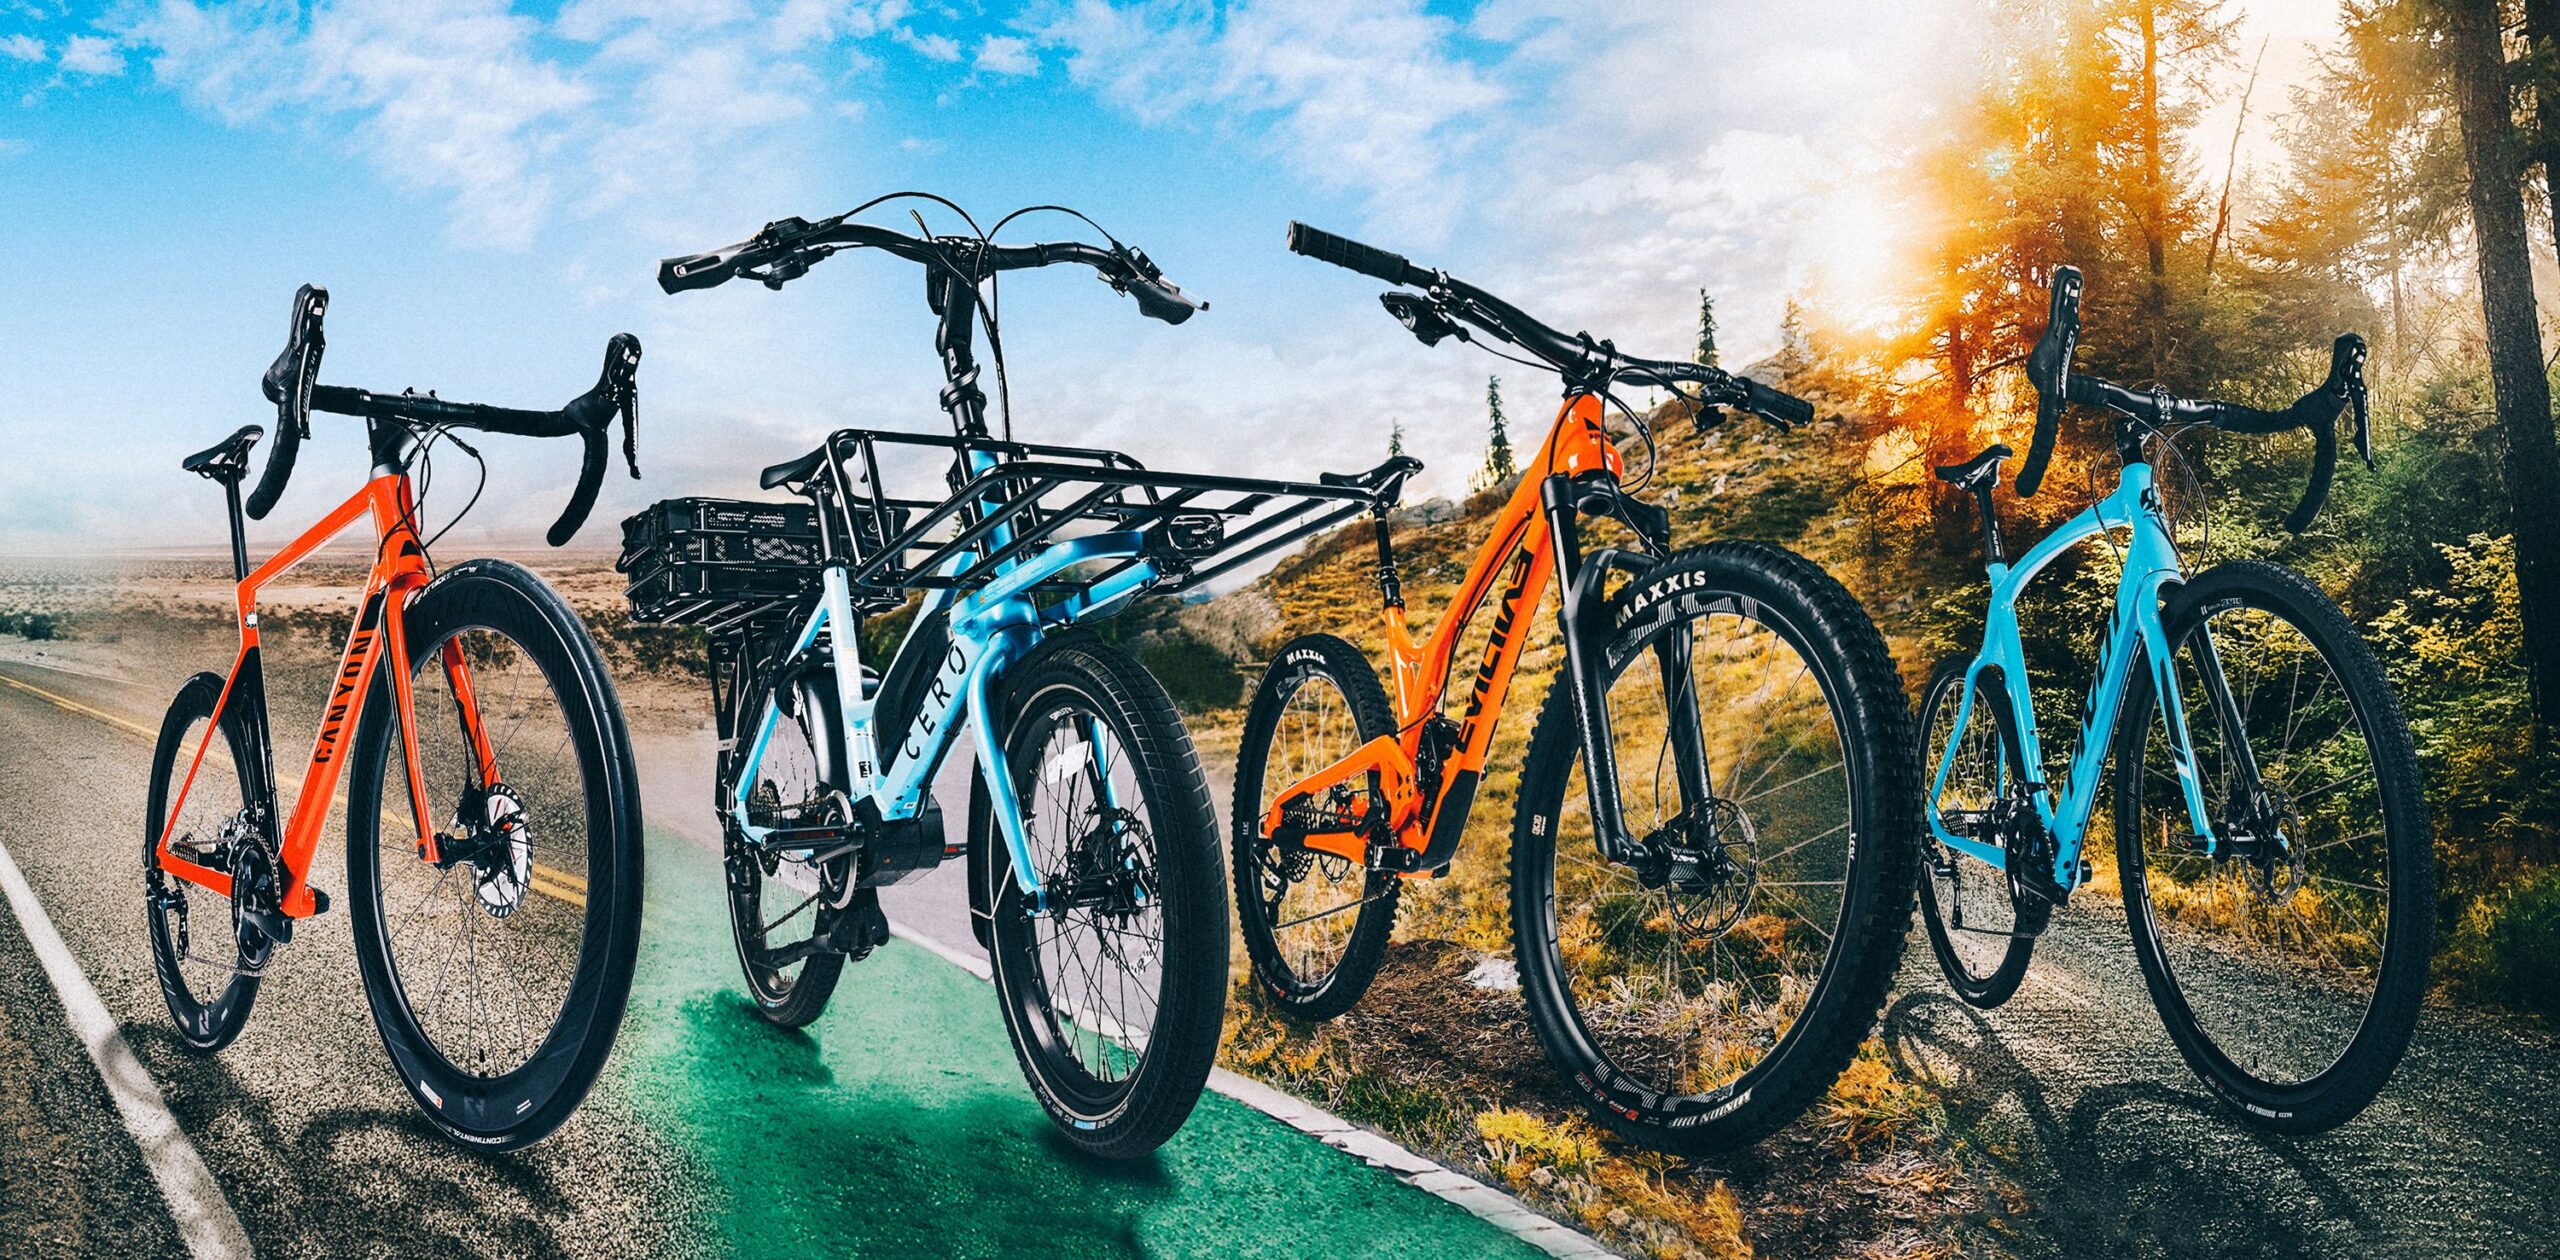 5 Best Gear Bicycles to Buy if You’re Looking for a Comfortable Bike